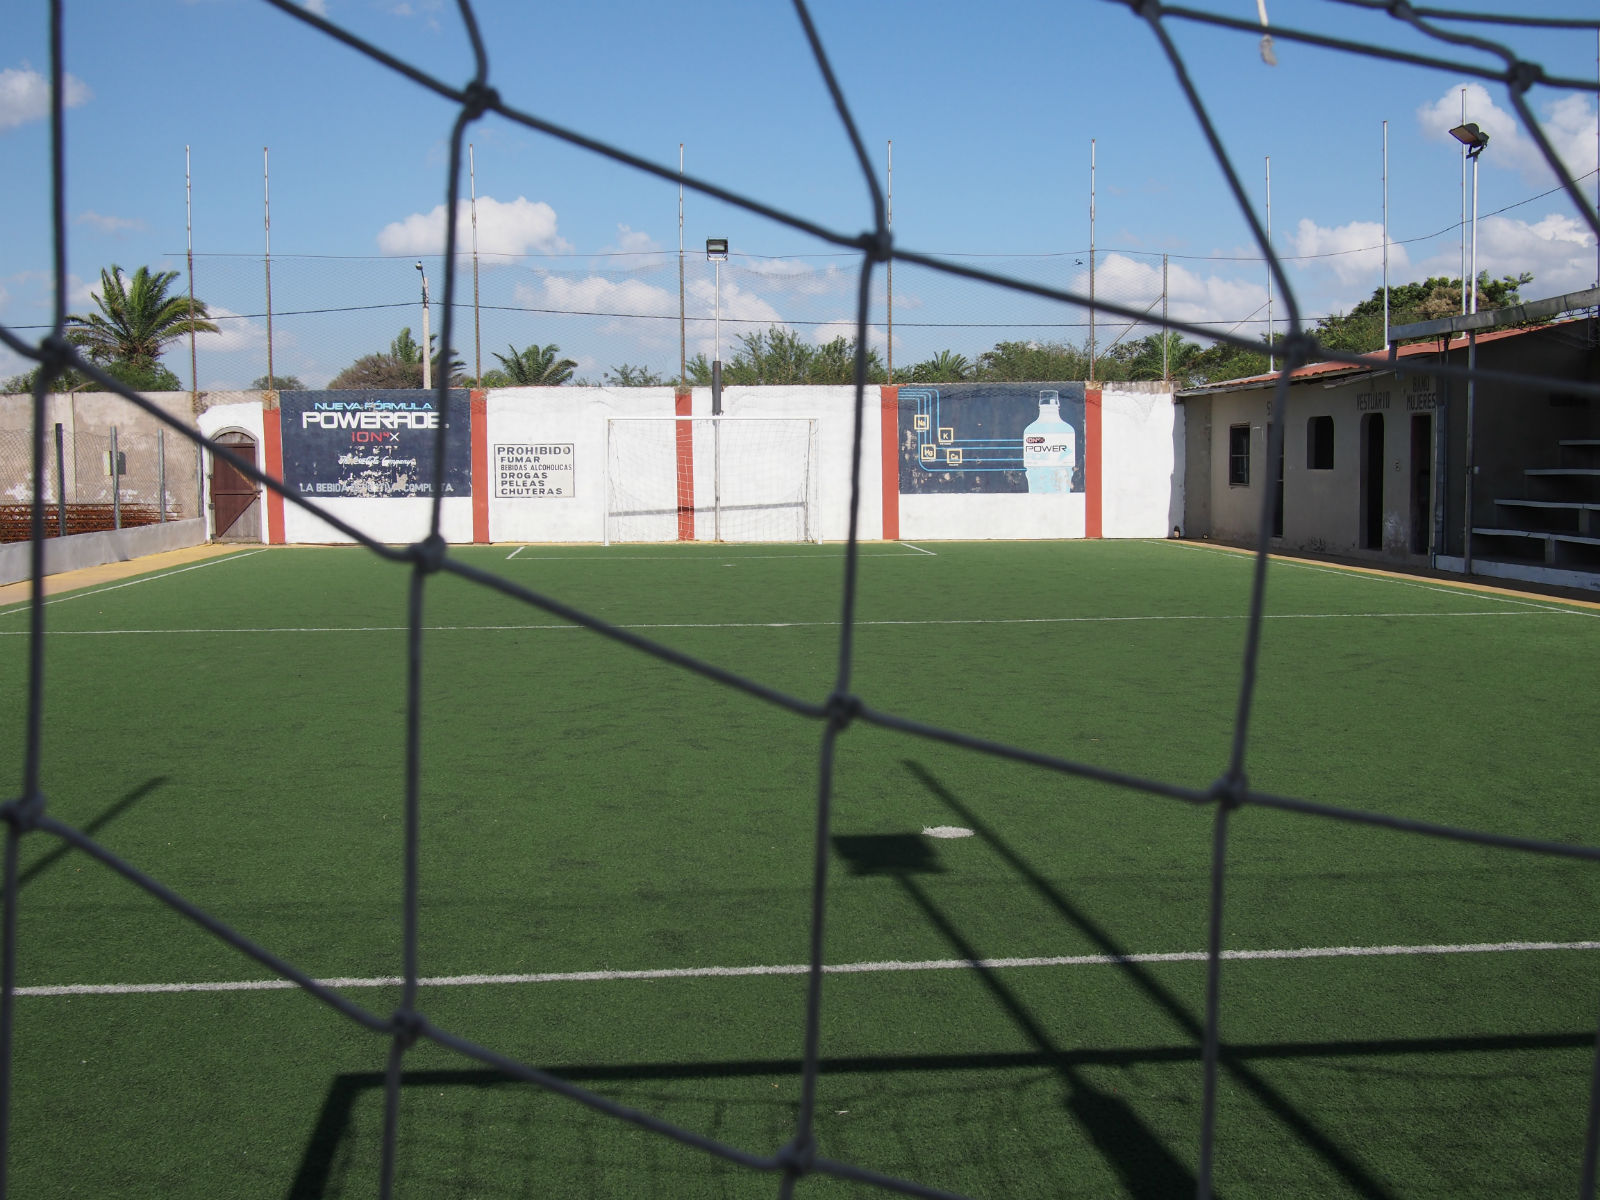 The cancha (soccer field), where the boys play. They also rent the field to neighbors, which provides some income.